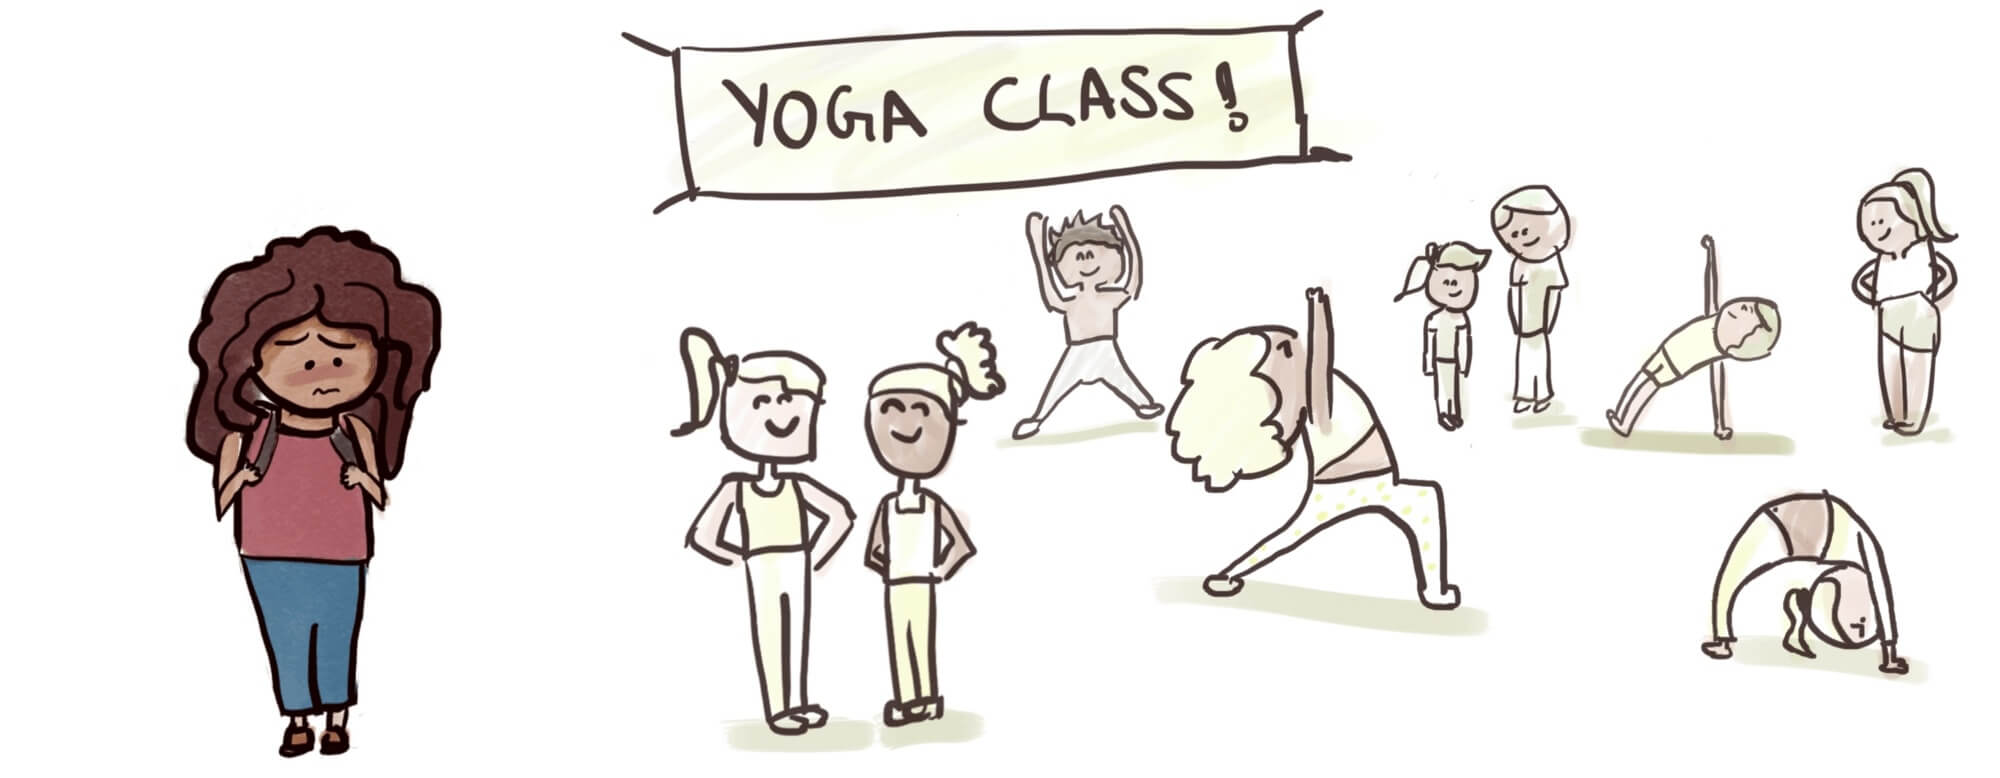 Confirmation bias in the yoga class